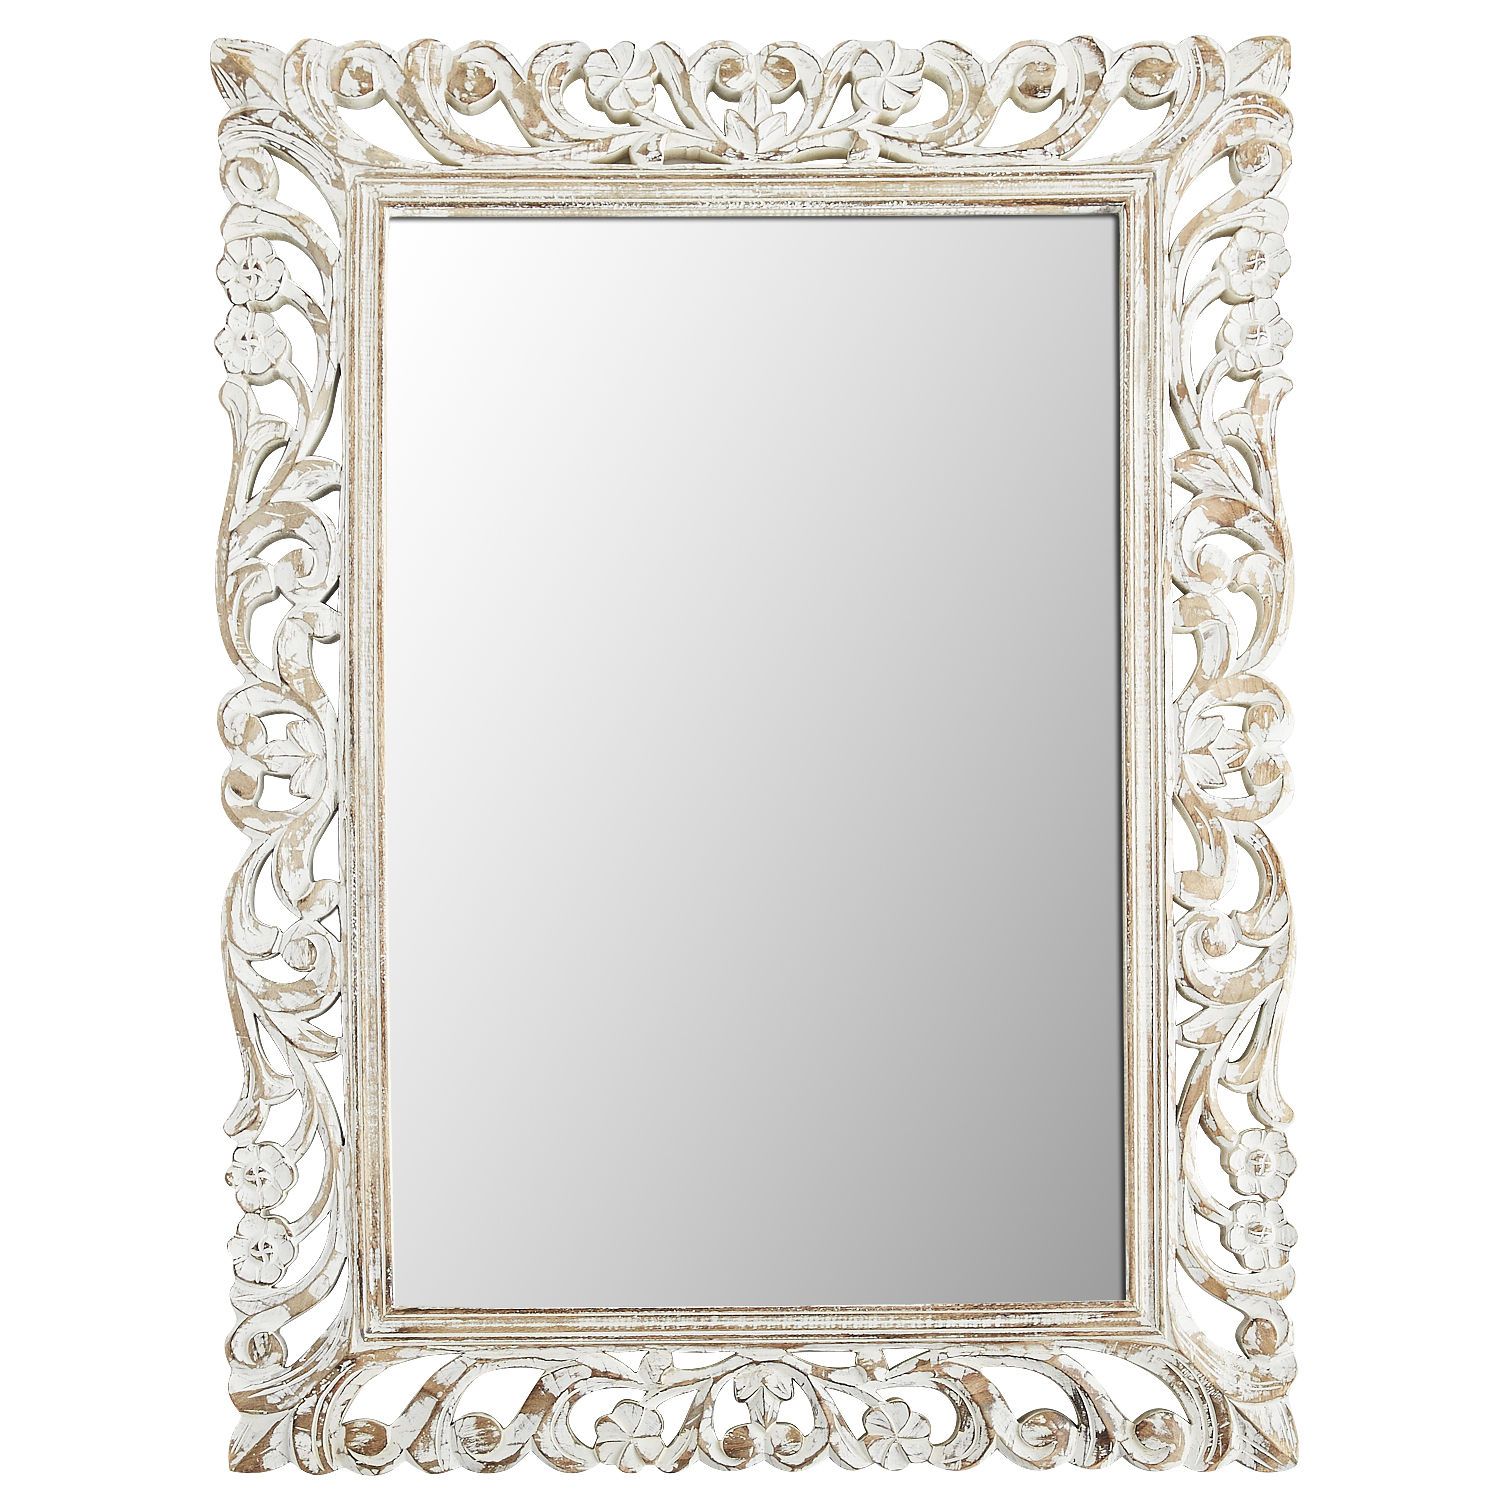 White Floral Carved Wood Frame 36x48 Mirror | Pier 1 Imports